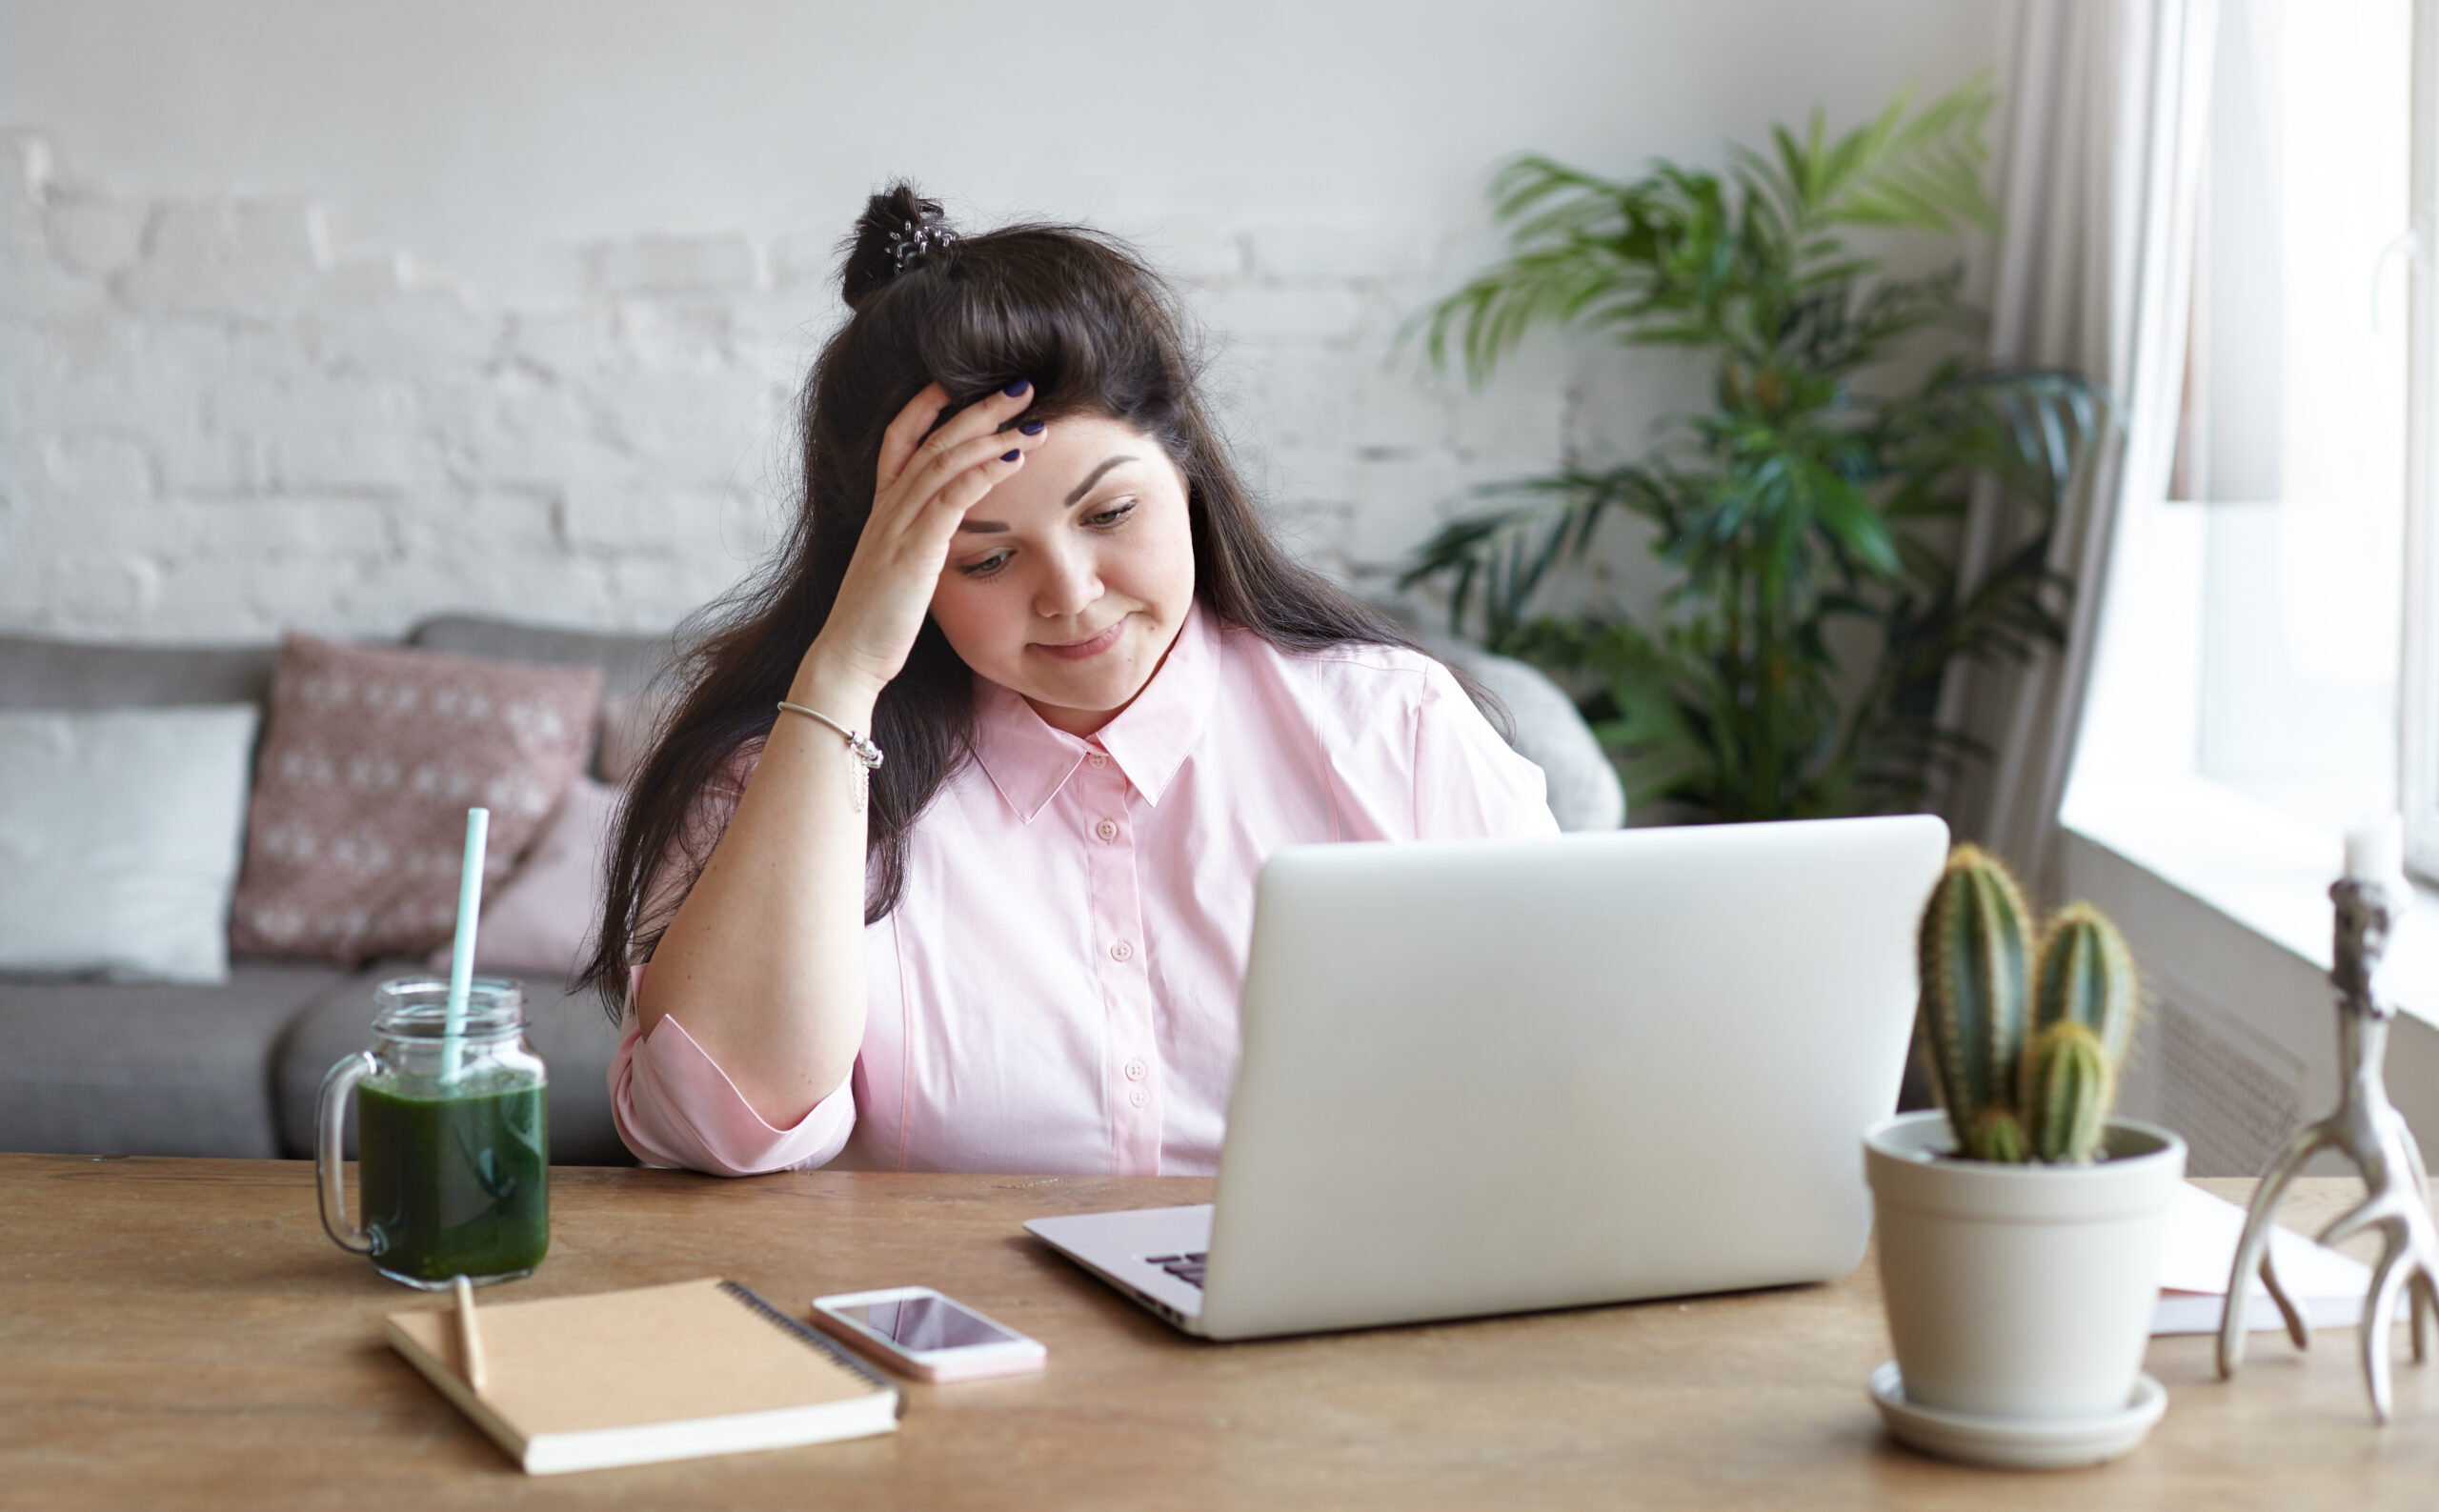 woman on laptop push through tough times in her business